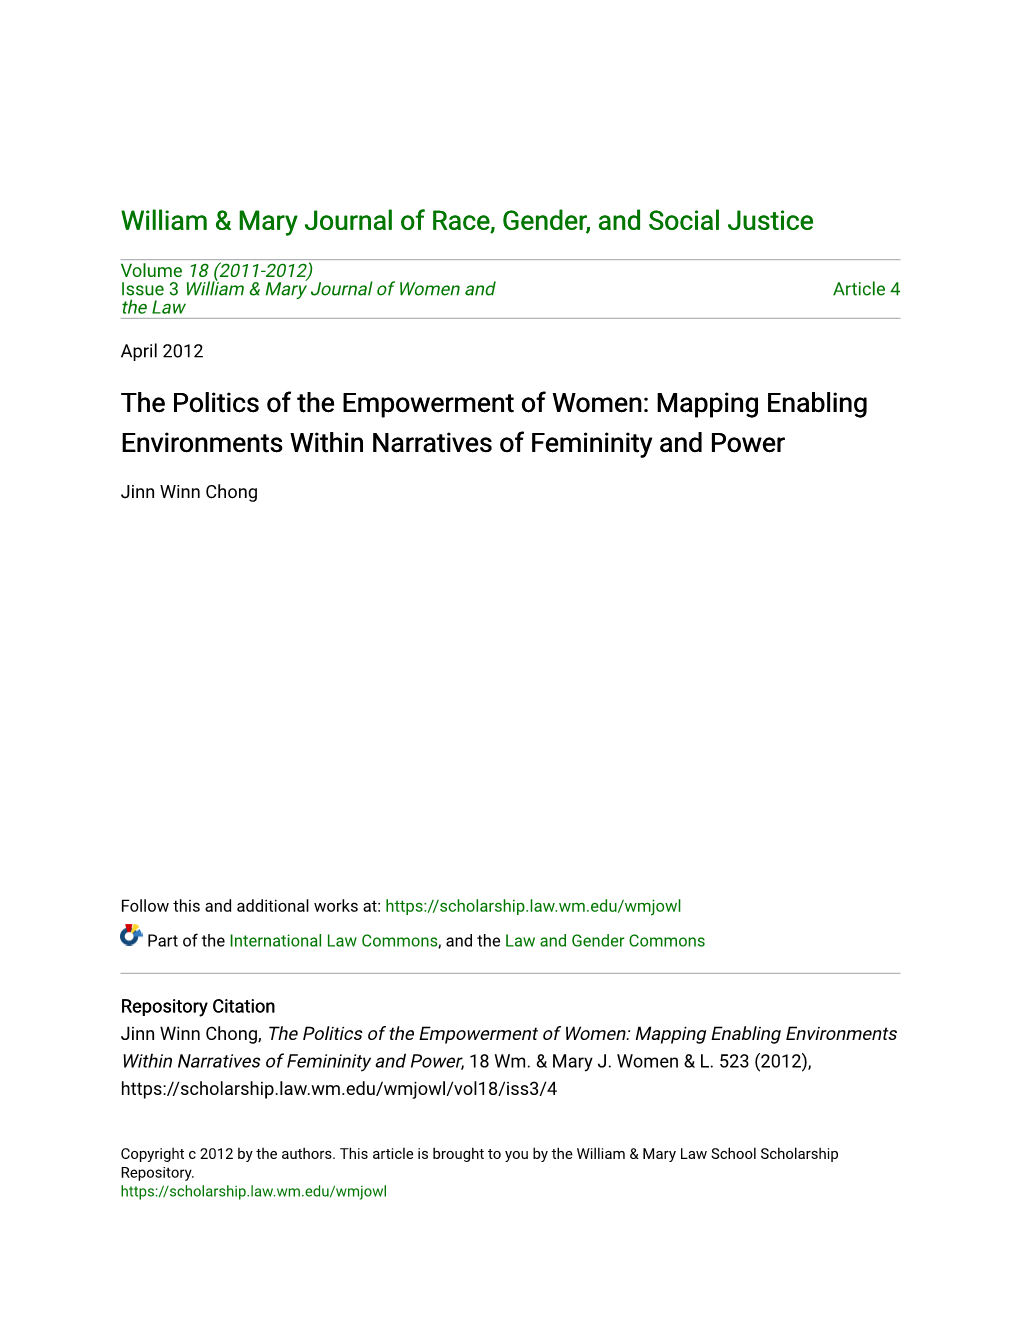 The Politics of the Empowerment of Women: Mapping Enabling Environments Within Narratives of Femininity and Power